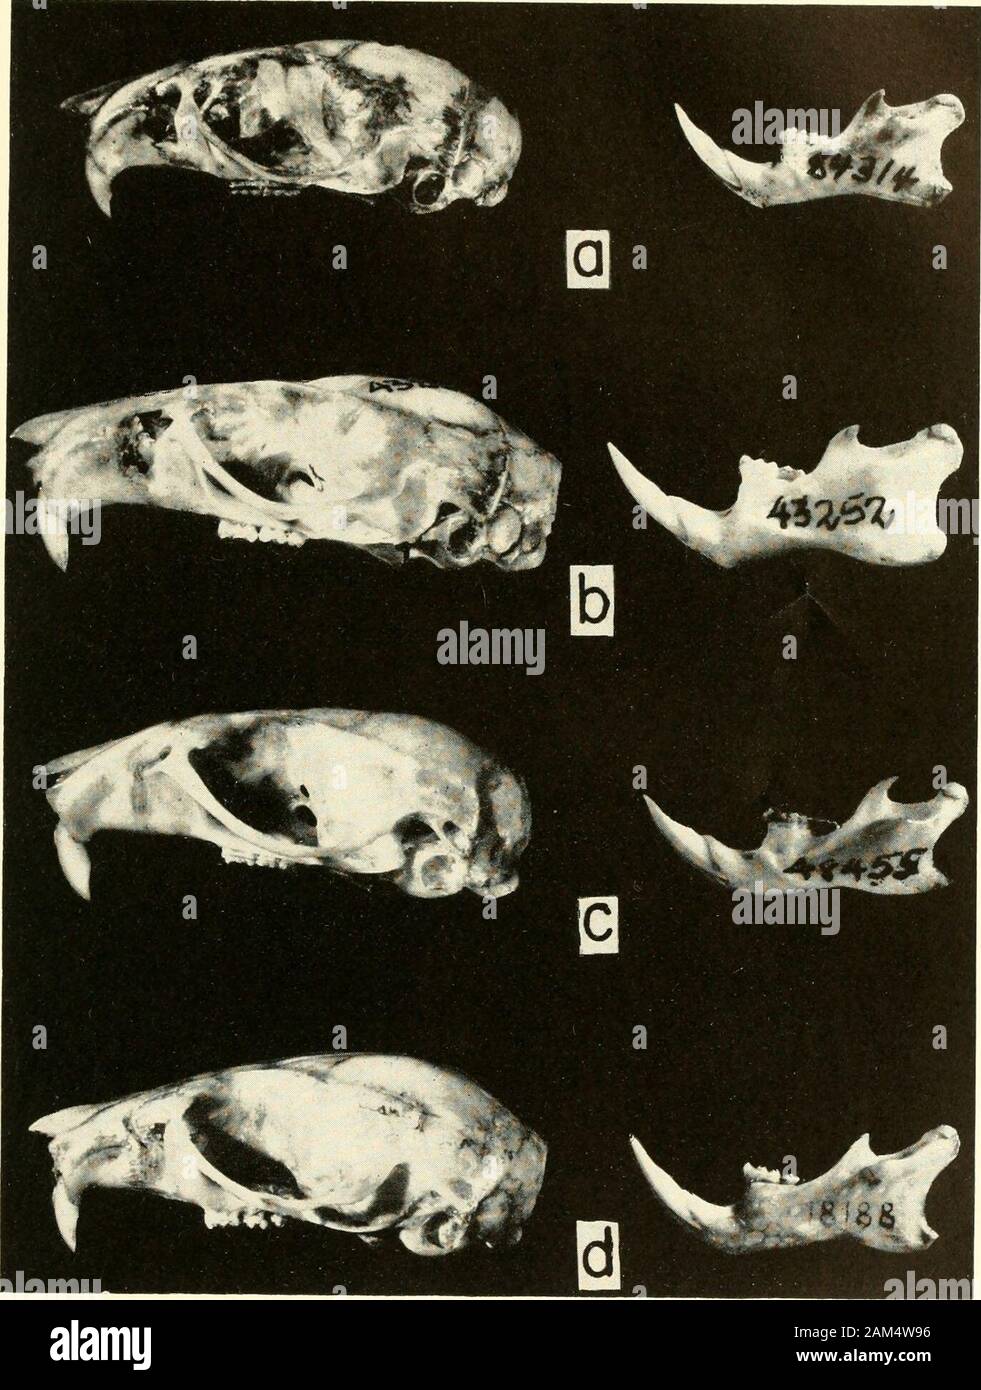 Proceedings of the United States National Museum . PROC, US, NAT MUS. VOL. 110 HERSHKOVITZ, PLATE 3. Lateral aspect (X 2) of same skulls (with mandibles) shown in plates 1, 2: a, Oryzomysbicolor; b, 0. concolor; c, 0. palustris; d, Rhipidomys venuslus. PROC US. NAT. MUS. VOL. 110 HERSHKOVITZ, PLATE 4 Stock Photo